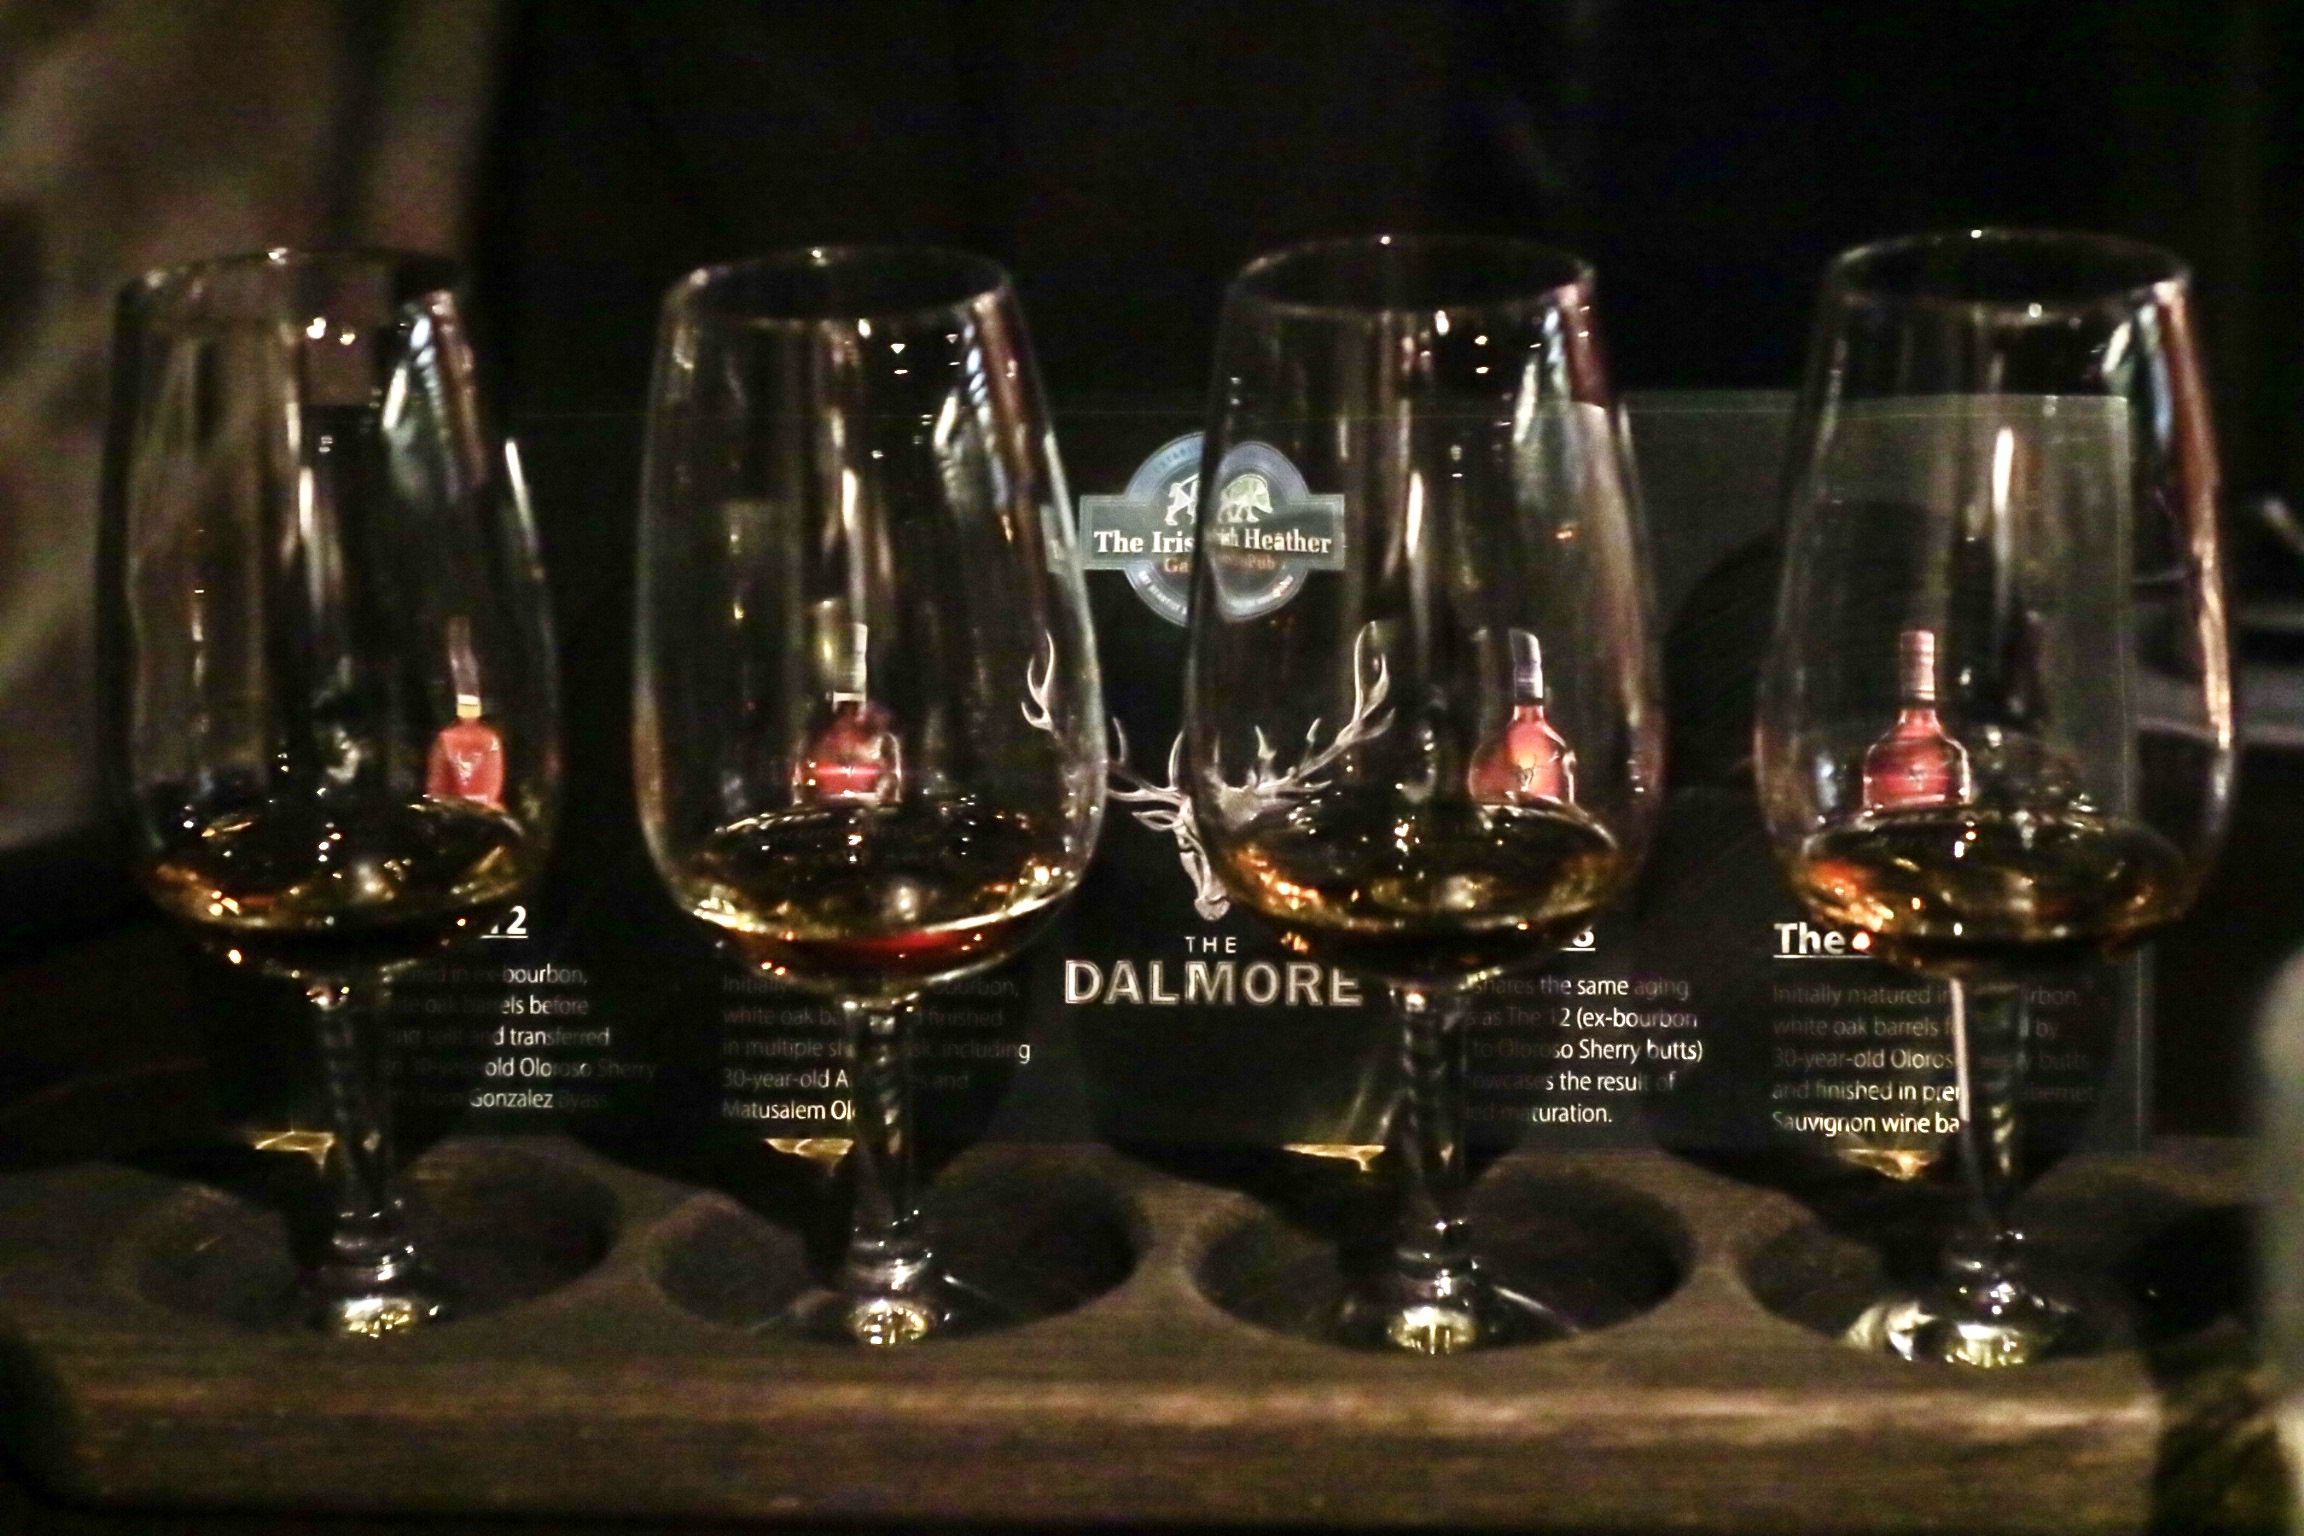 45 Years of Dalmore